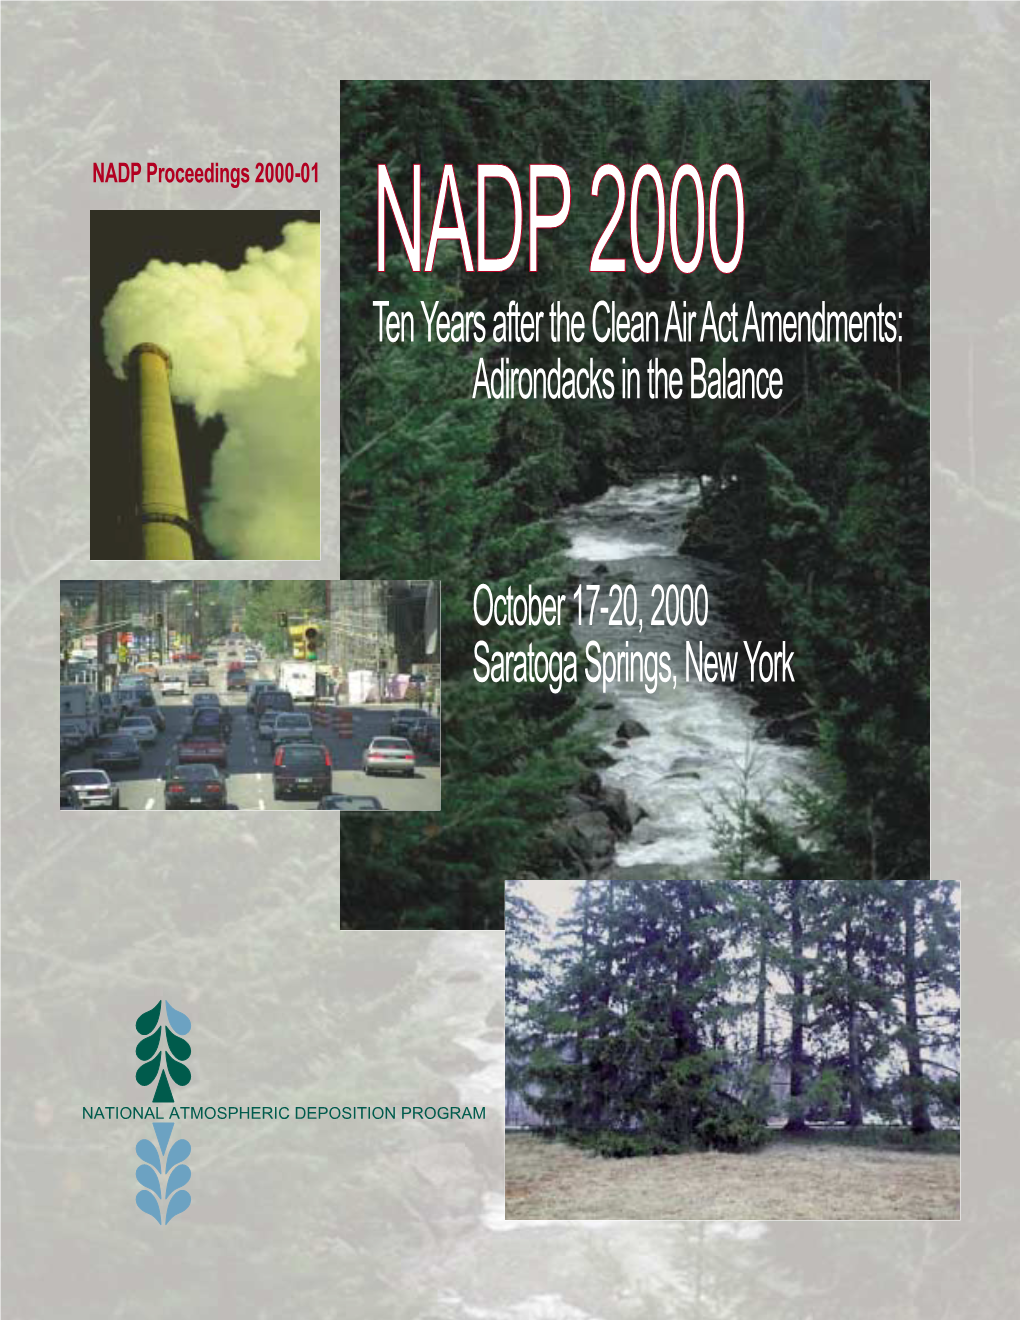 NADP Proceedings 2000-01 NADP 2000 Ten Years After the Clean Air Act Amendments: Adirondacks in the Balance